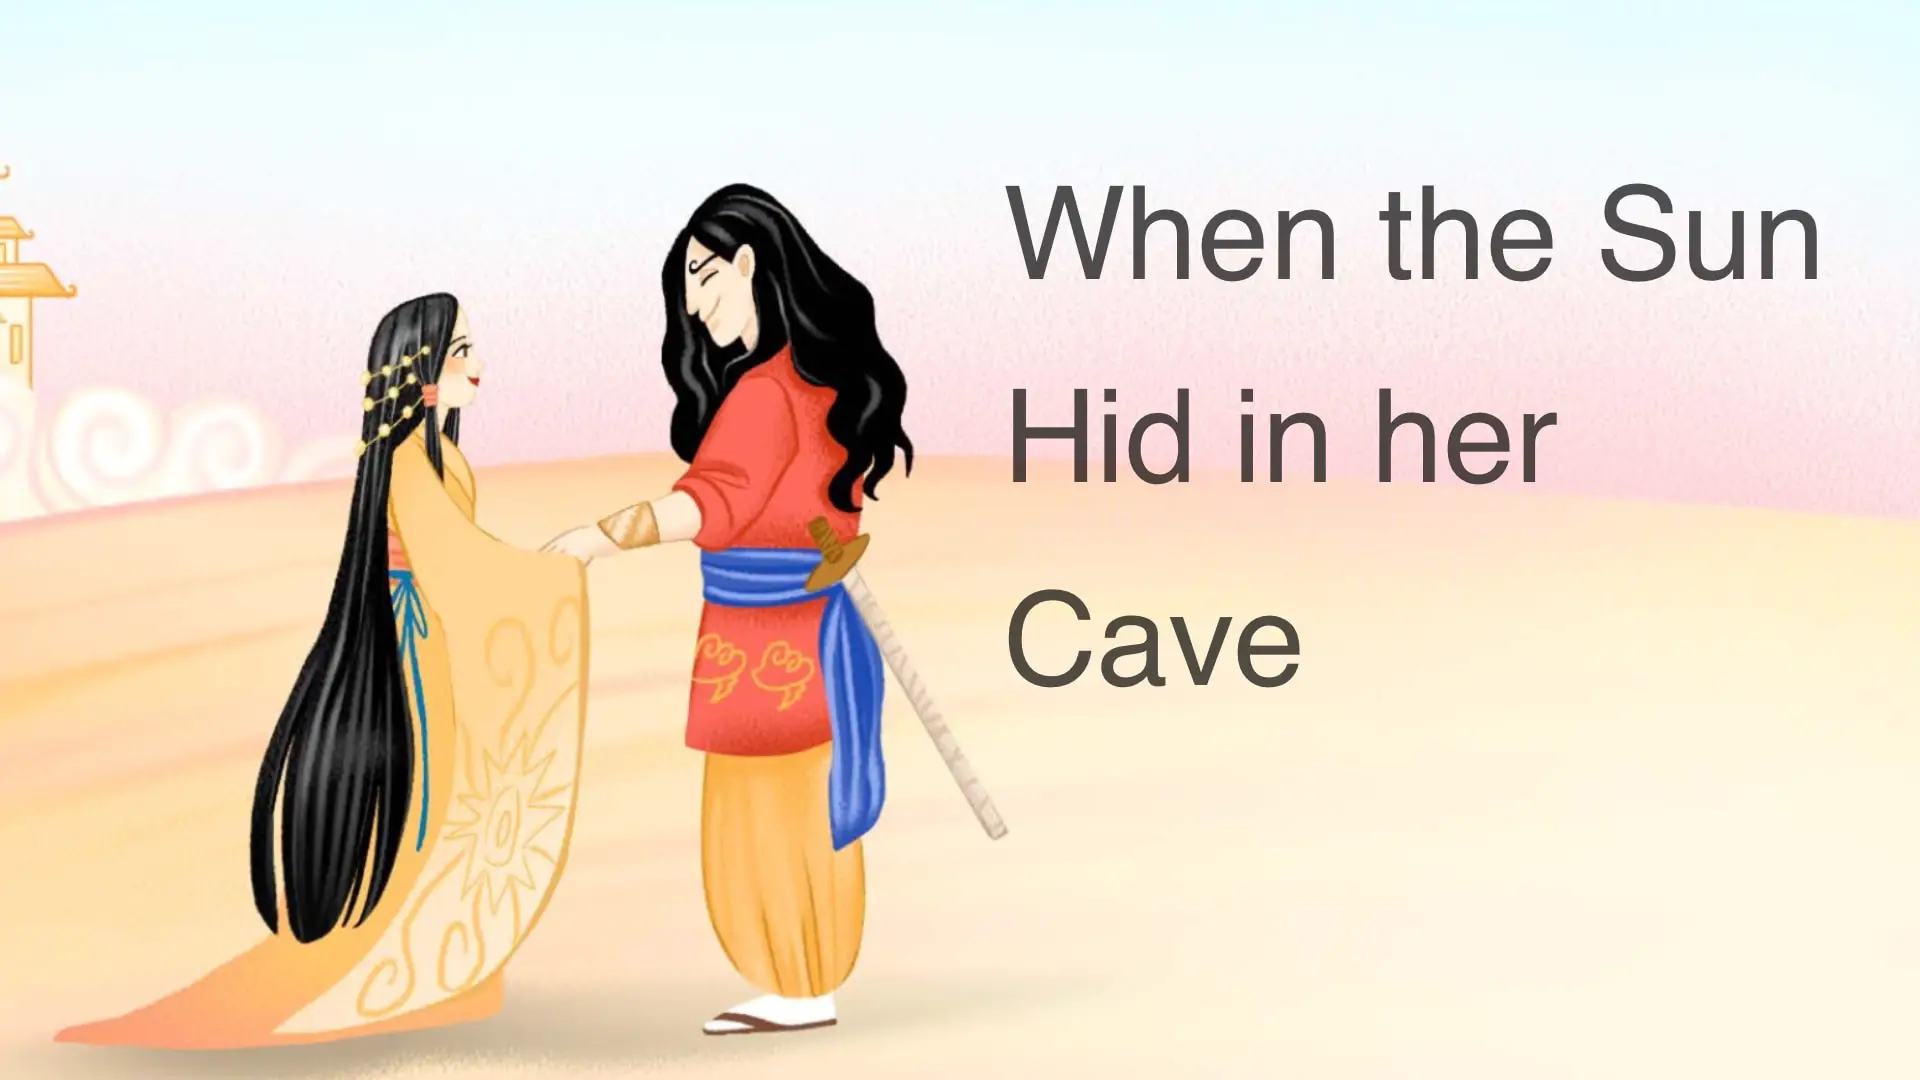 Visit the mythical cave that hid the Sun Goddess in Japanese